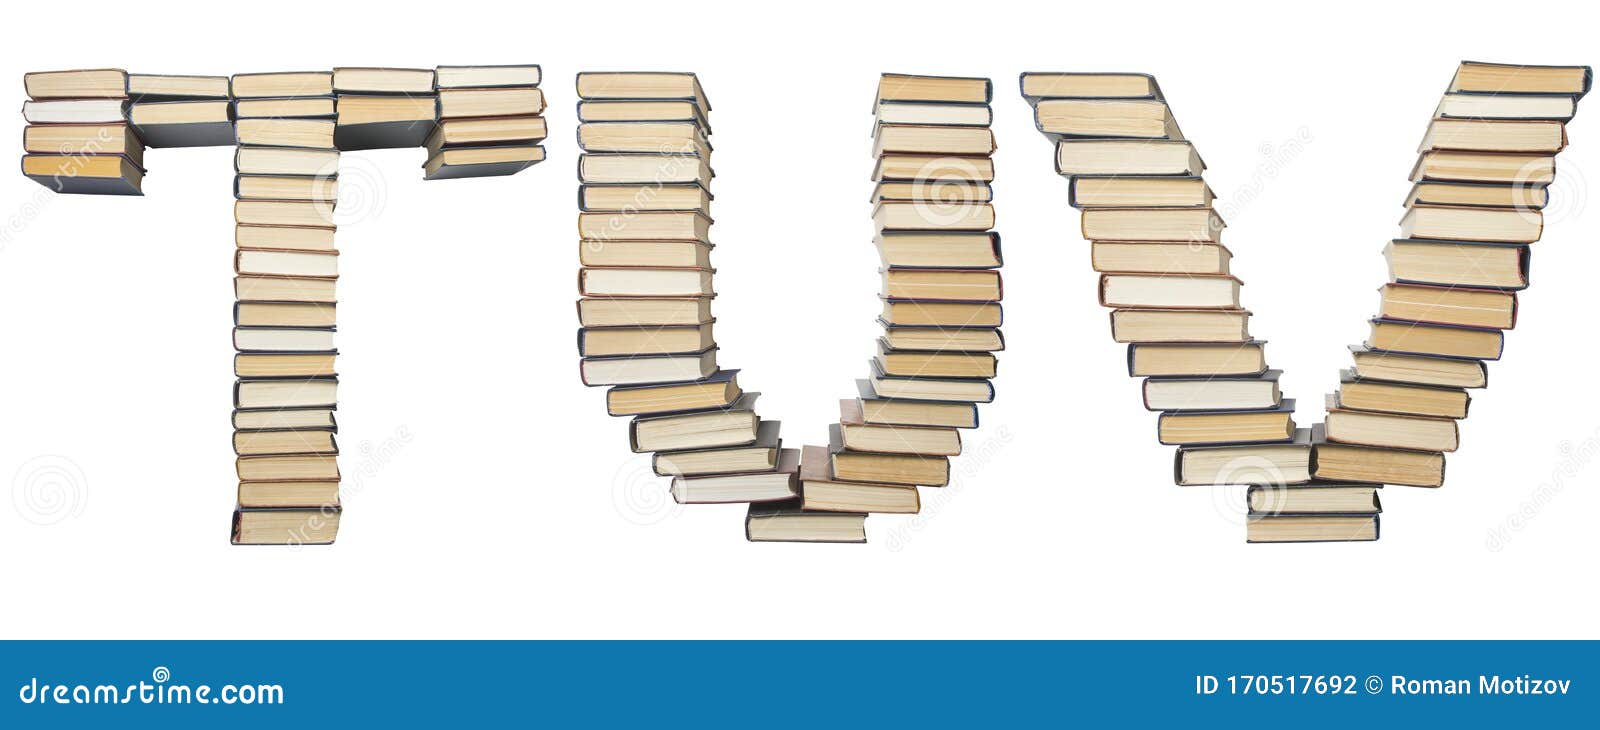 t u v letter from books. alphabet  on white background. font composed of spines of books